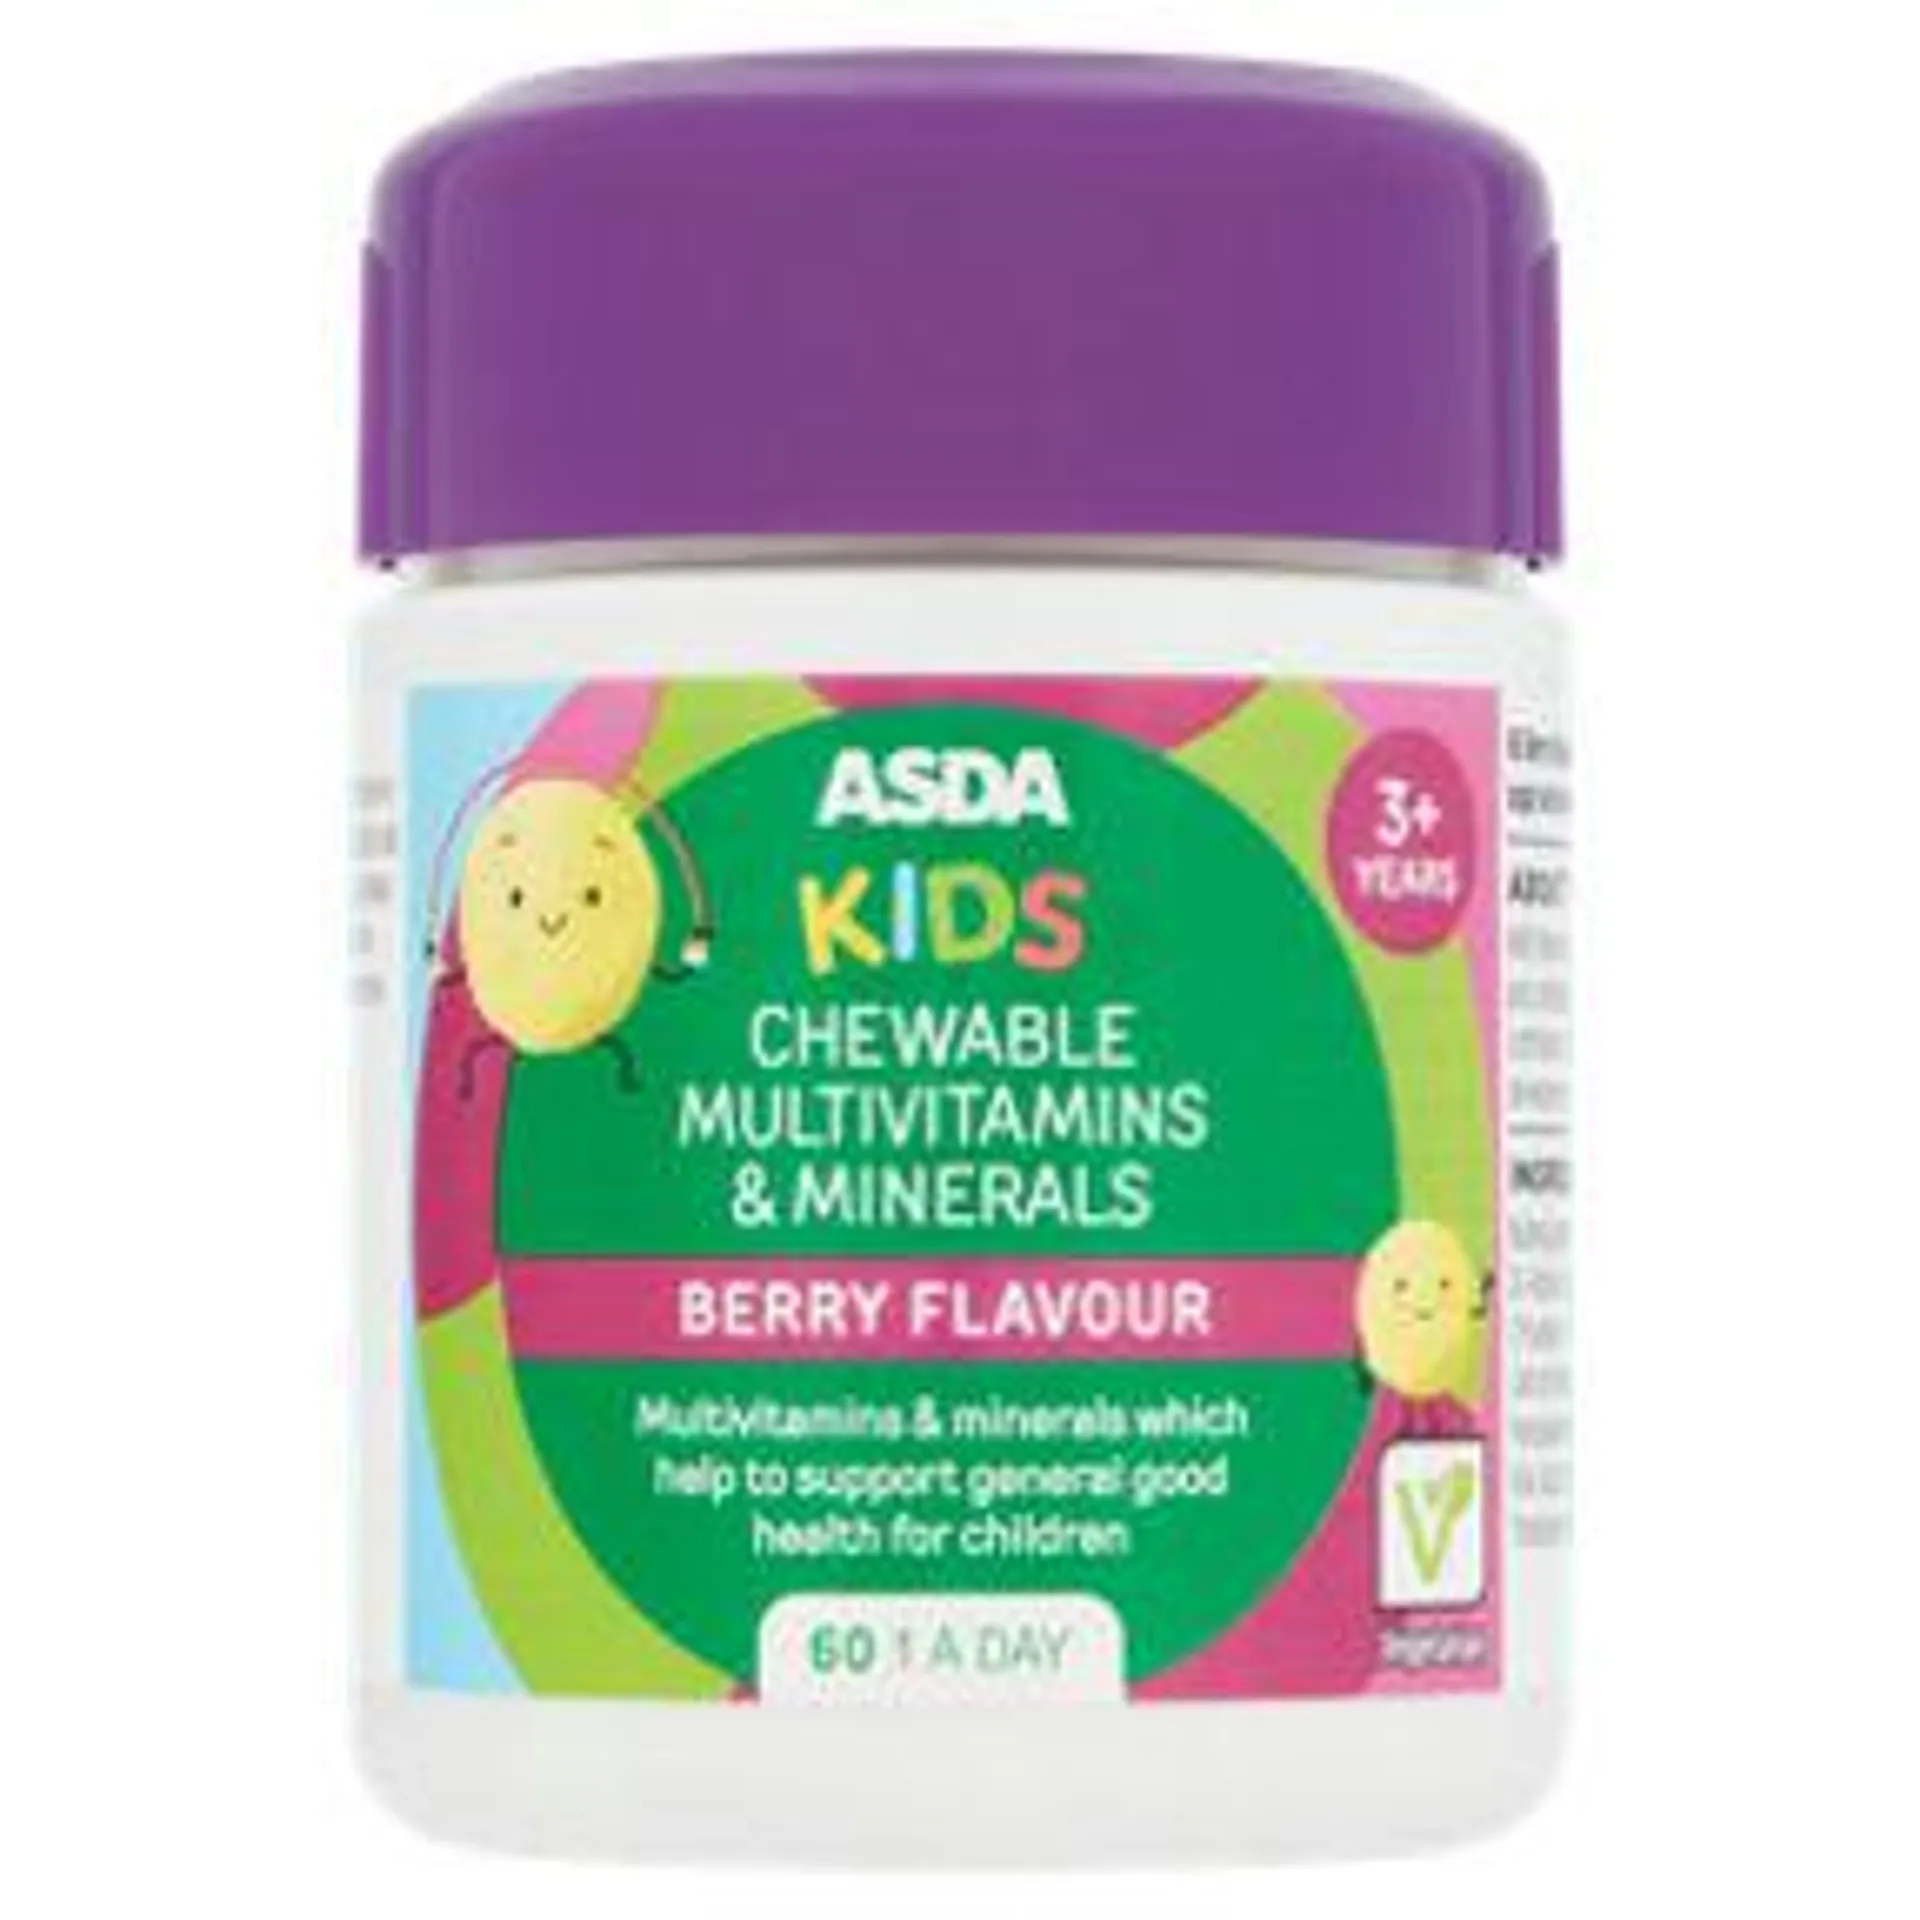 ASDA Kids 60 Chewable Multivitamins & Minerals Berry Flavour 3+ Years 1 A Day 60 Tablets